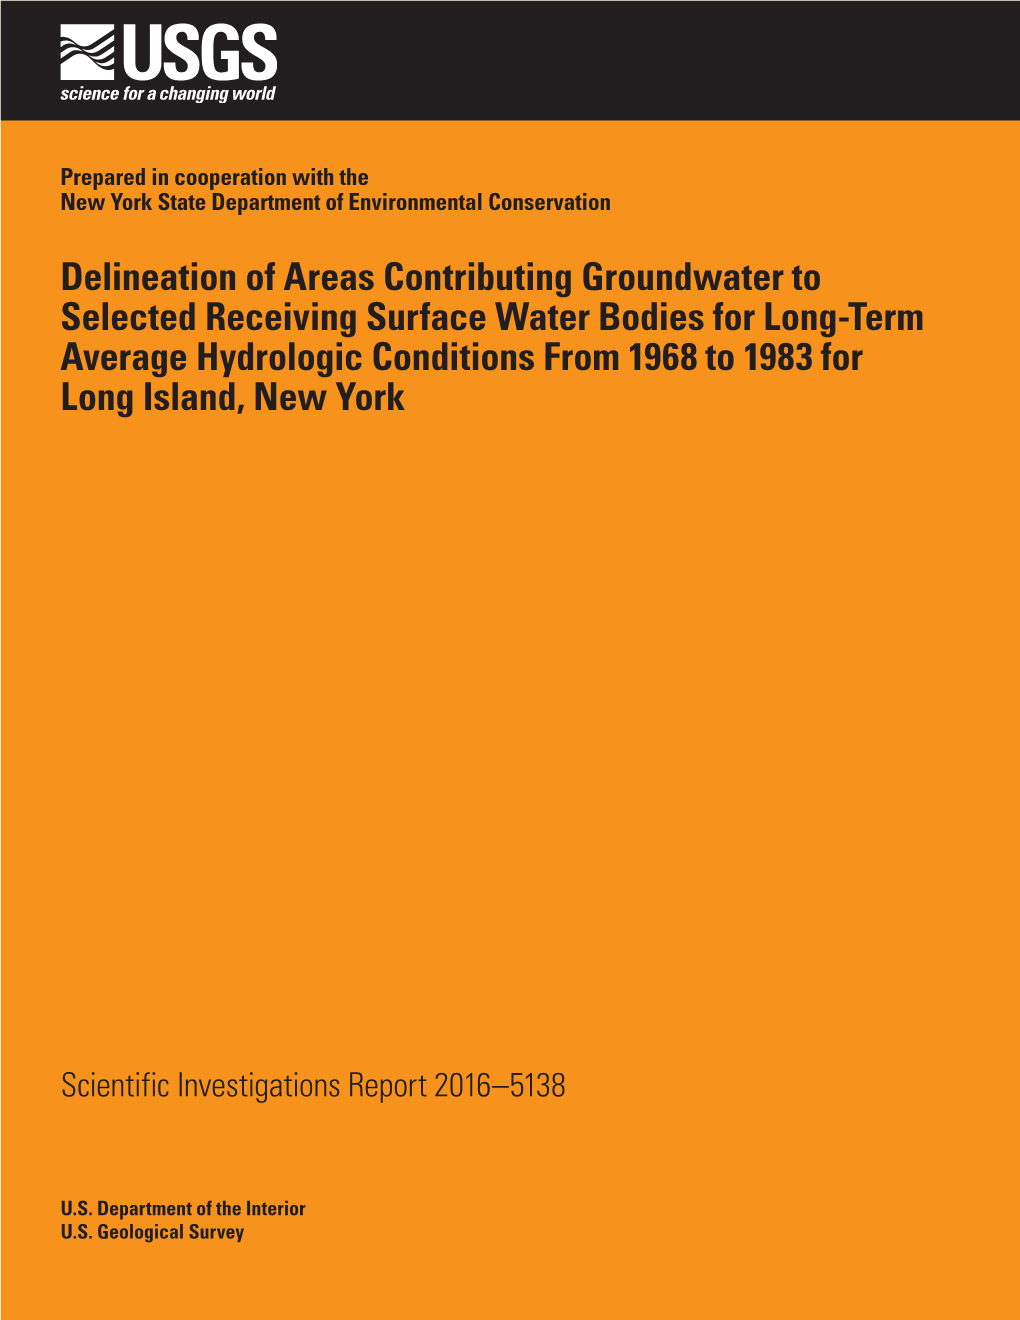 Delineation of Areas Contributing Groundwater to Selected Receiving